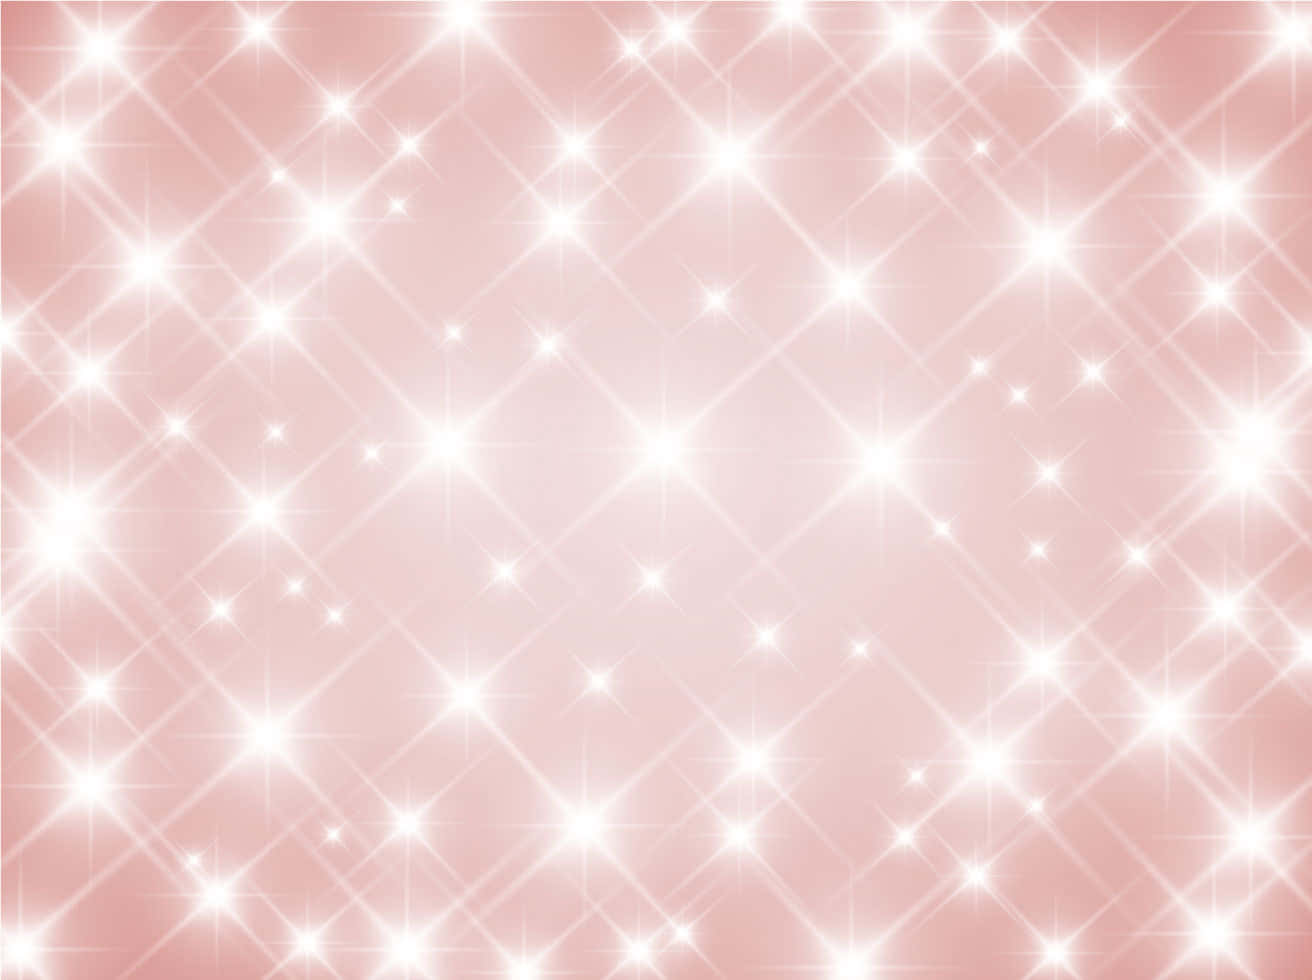 A beautiful and sparkly pink background perfect for brightening up any day.